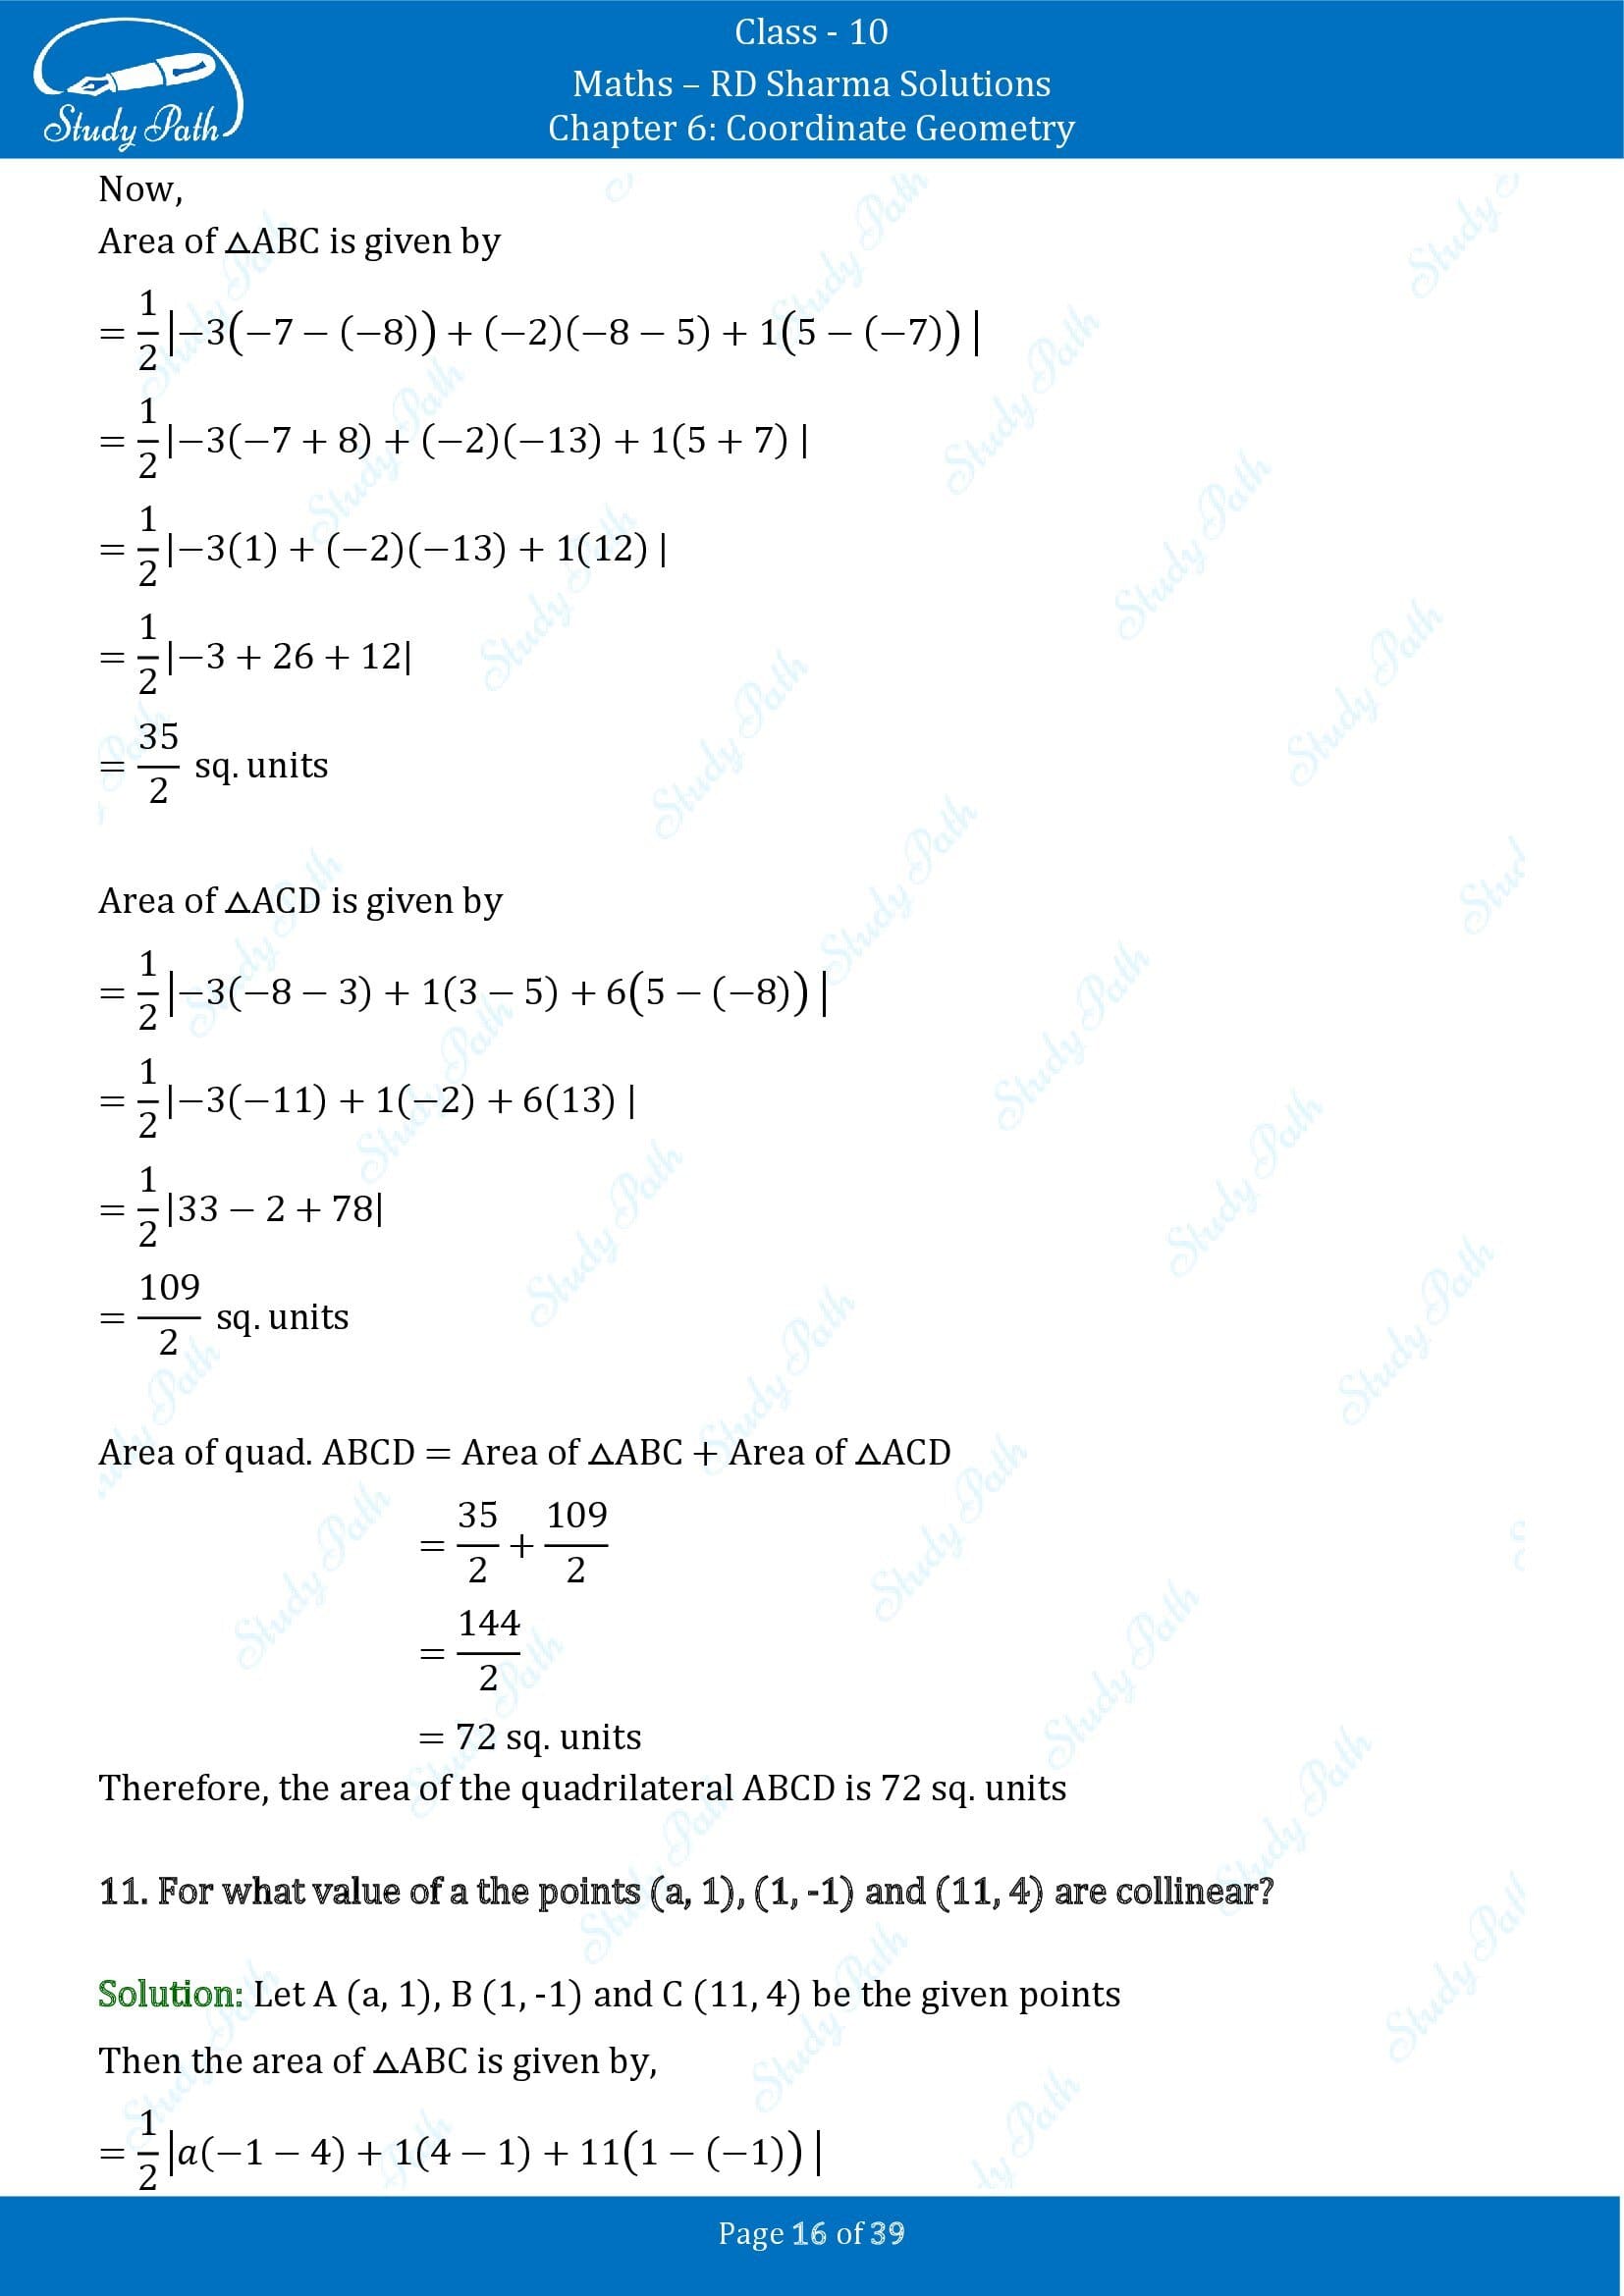 RD Sharma Solutions Class 10 Chapter 6 Coordinate Geometry Exercise 6.5 0016